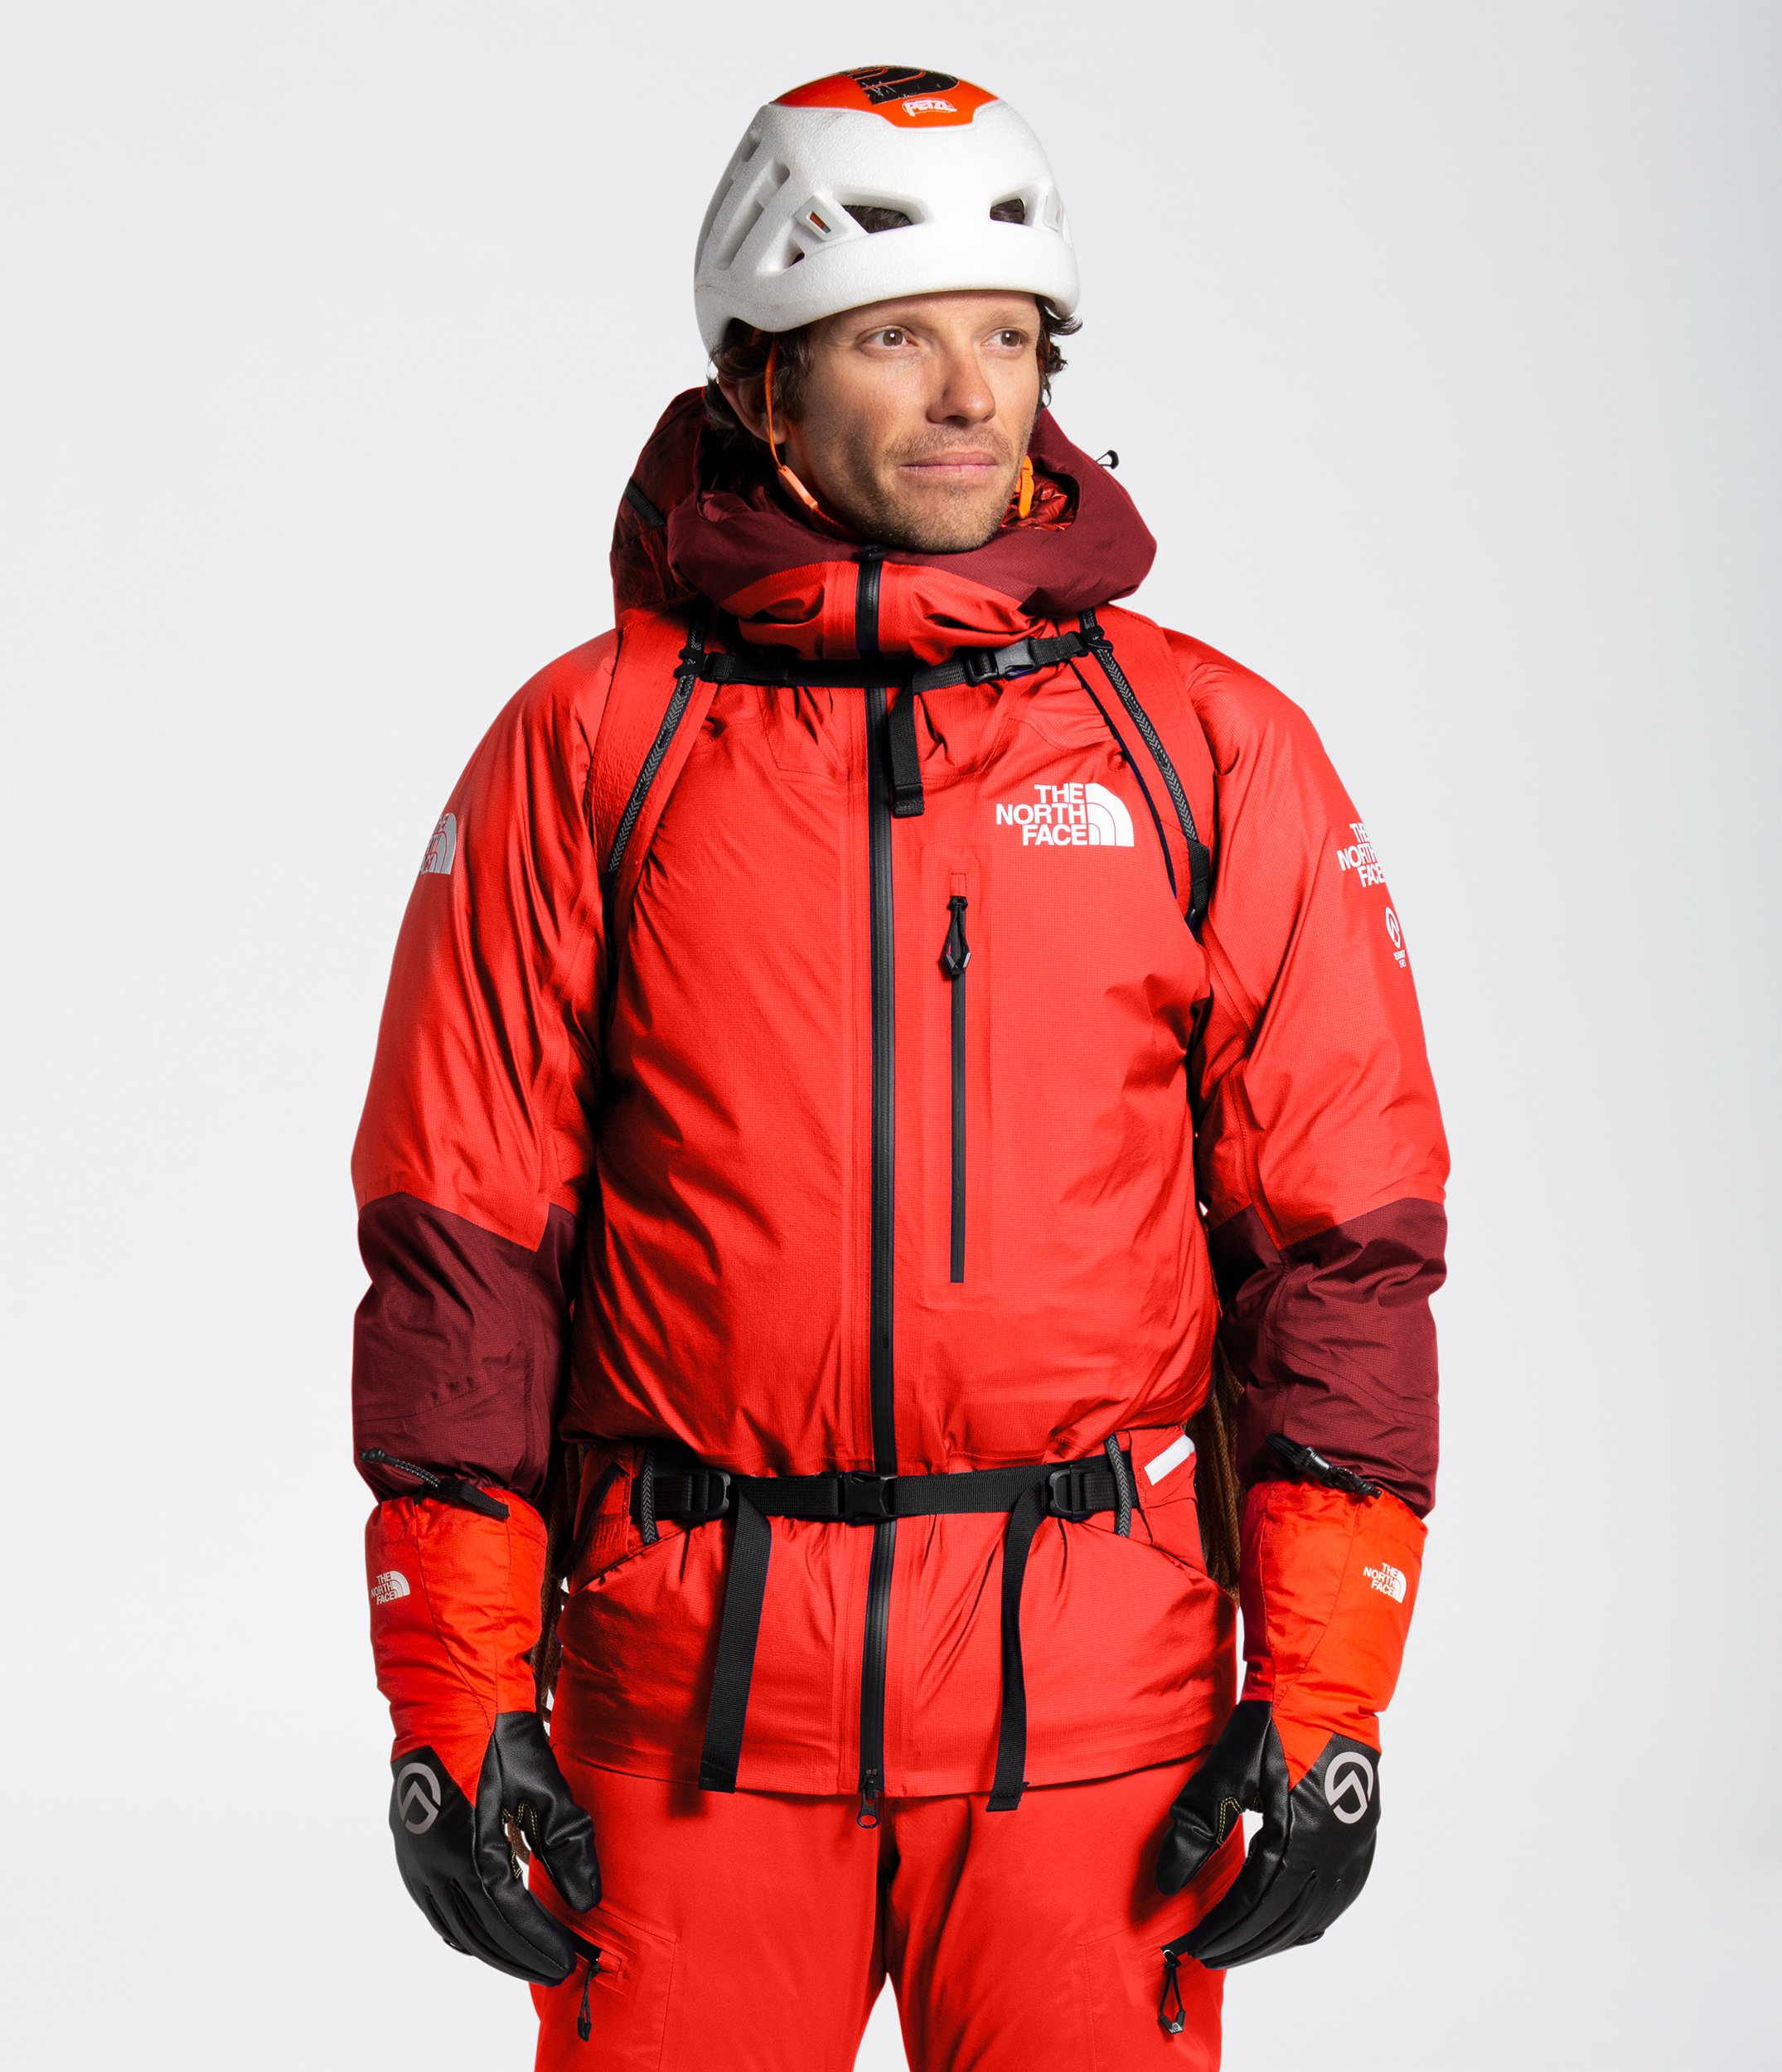 The North Face Advanced Mountain Kit | Best Canadian Alpinist